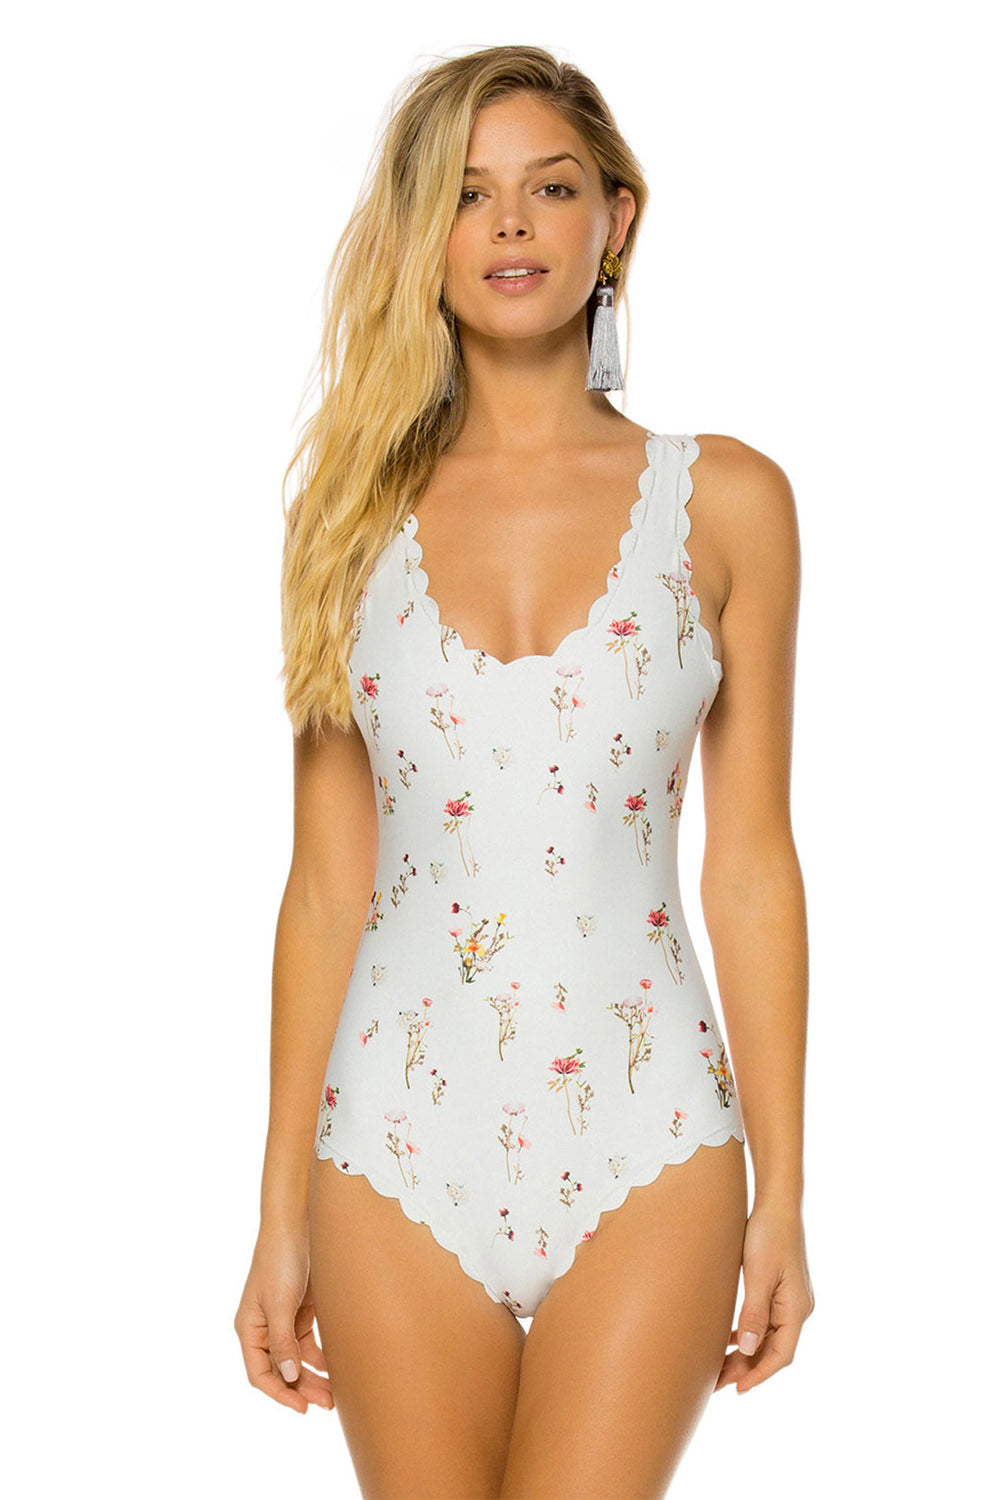 Iyasson Floral Print Laciness One-piece Swimsuit